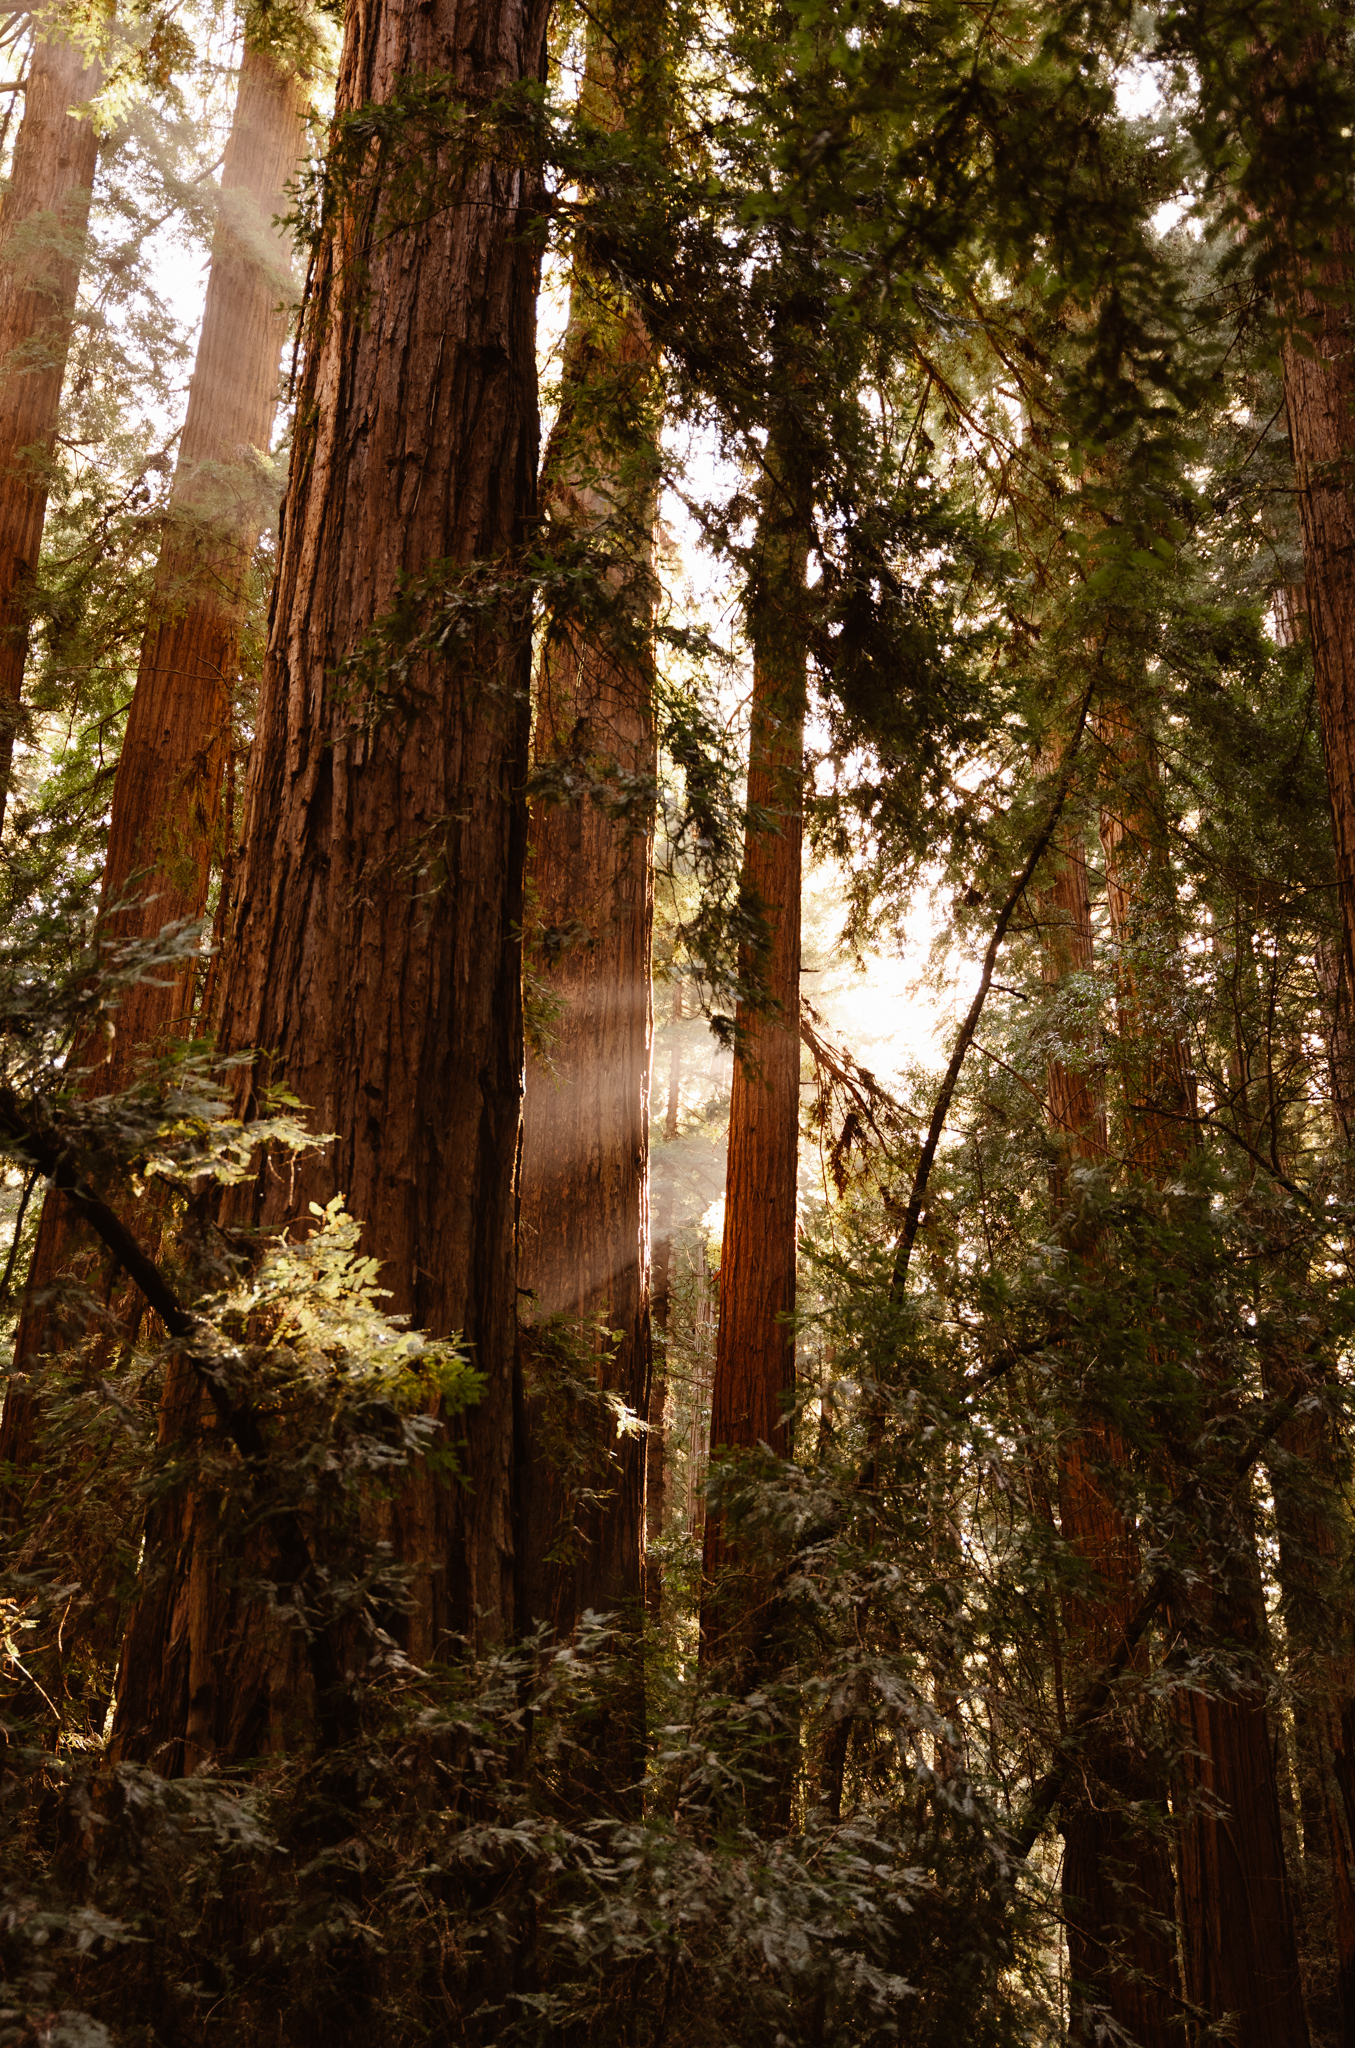 Sunlight streams through a forest of tall redwoods, with beams of light visible among the dense foliage.